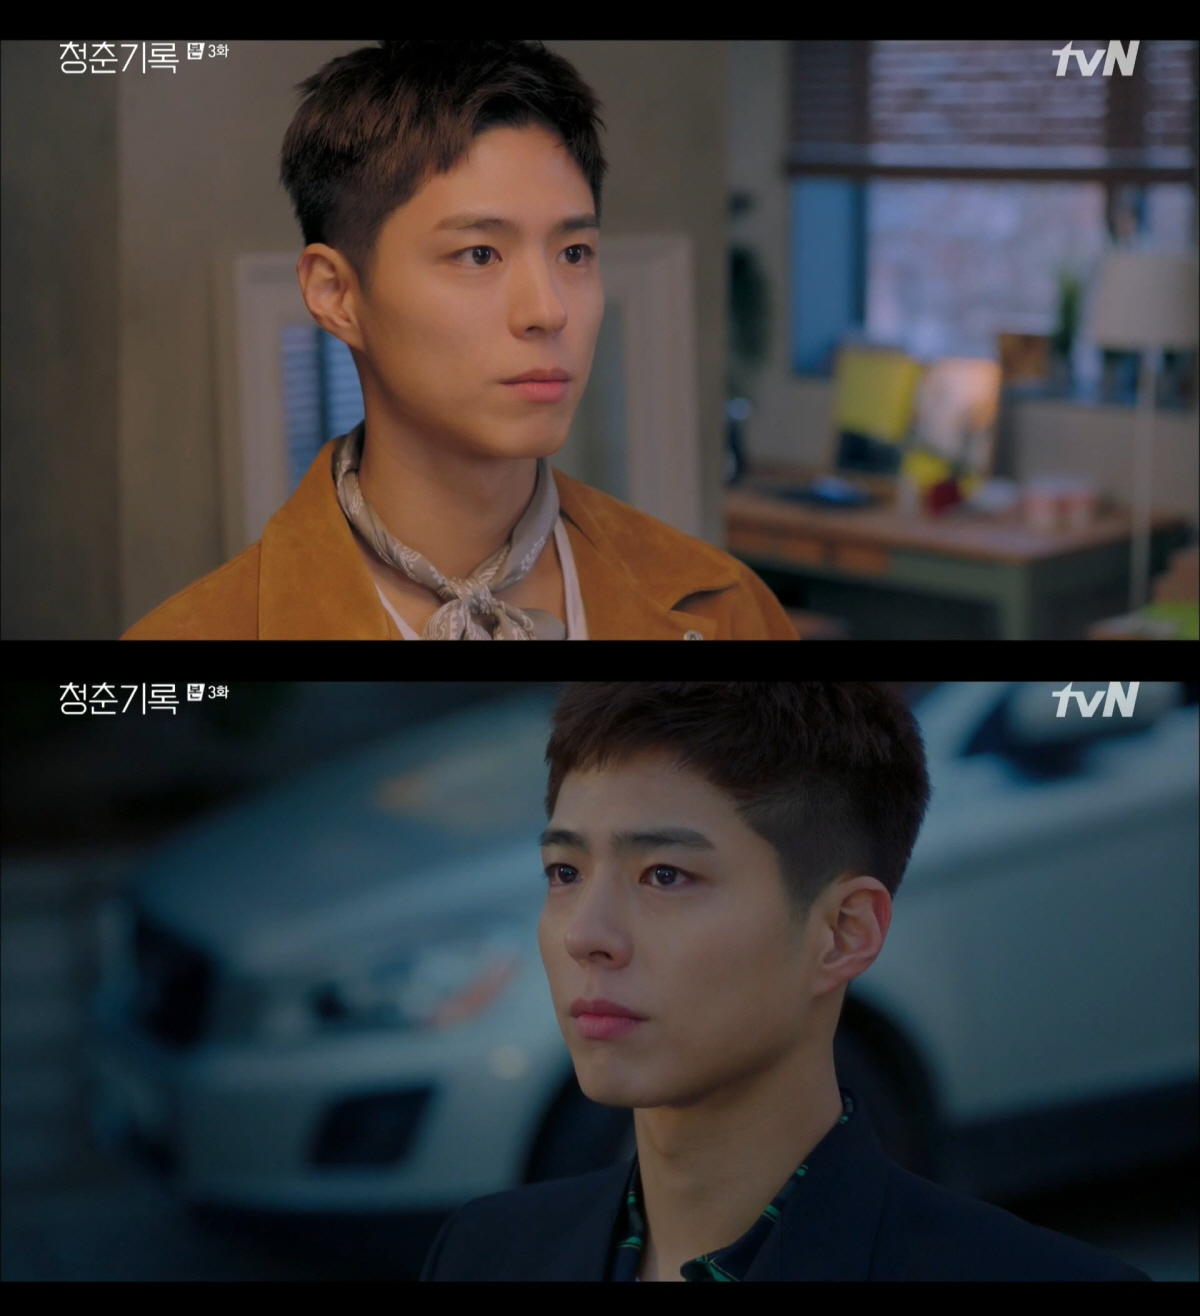 In the third episode of Record of Youth, Park Bo-gum (played by Sa Hye-joon) presented the self-portrait of youth in the Border between dreams and reality, between love and friendship as a shrewd inner act.Park Bo-gum was determined to go to the army after falling into the movie audition he wanted, but he was rich without letting go of his passion and hope for his dreams.Moreover, he learned of the situation in which his friend Byun Woo-seok (played by Won Hae-hyo) gave consideration to the media pictorials so that he could take pictures together, and his mind became complicated by various Feelings that he did not know.Shin Dong-mi (played by Lee Min-jae), who claims to be a manager, also refused neatly, but he did not stop the inner conflict after that.Eventually, he faced his mind and vowed to challenge Actor again, foreshadowing a breakthrough in his dream.Park Bo-gum in the play expressed the Feelings of Sa Hye-joon, who conflict between dreams and reality that he wanted to achieve, with a tight inner Acting, leaving a deep lull.Also, in the relationship with Park So-dam (played by Ahn Jeong-ha), he attracted attention by conveying the Feelings of Border between love and friendship.The two people who have shared a lot of short time are becoming comforting and hopeful through each other.This relationship beyond simple excitement expresses another hope and courage in our lives.Park Bo-gum is not just a thrill, but also expresses dreams, hopes and self-portraits of youth convincingly and amplifies immersion.On this day, Park Bo-gum is said to have increased his immersion by expressing various Feelings that are not hopeful or hopeless in the middle of dreams and reality with tight inner Acting.